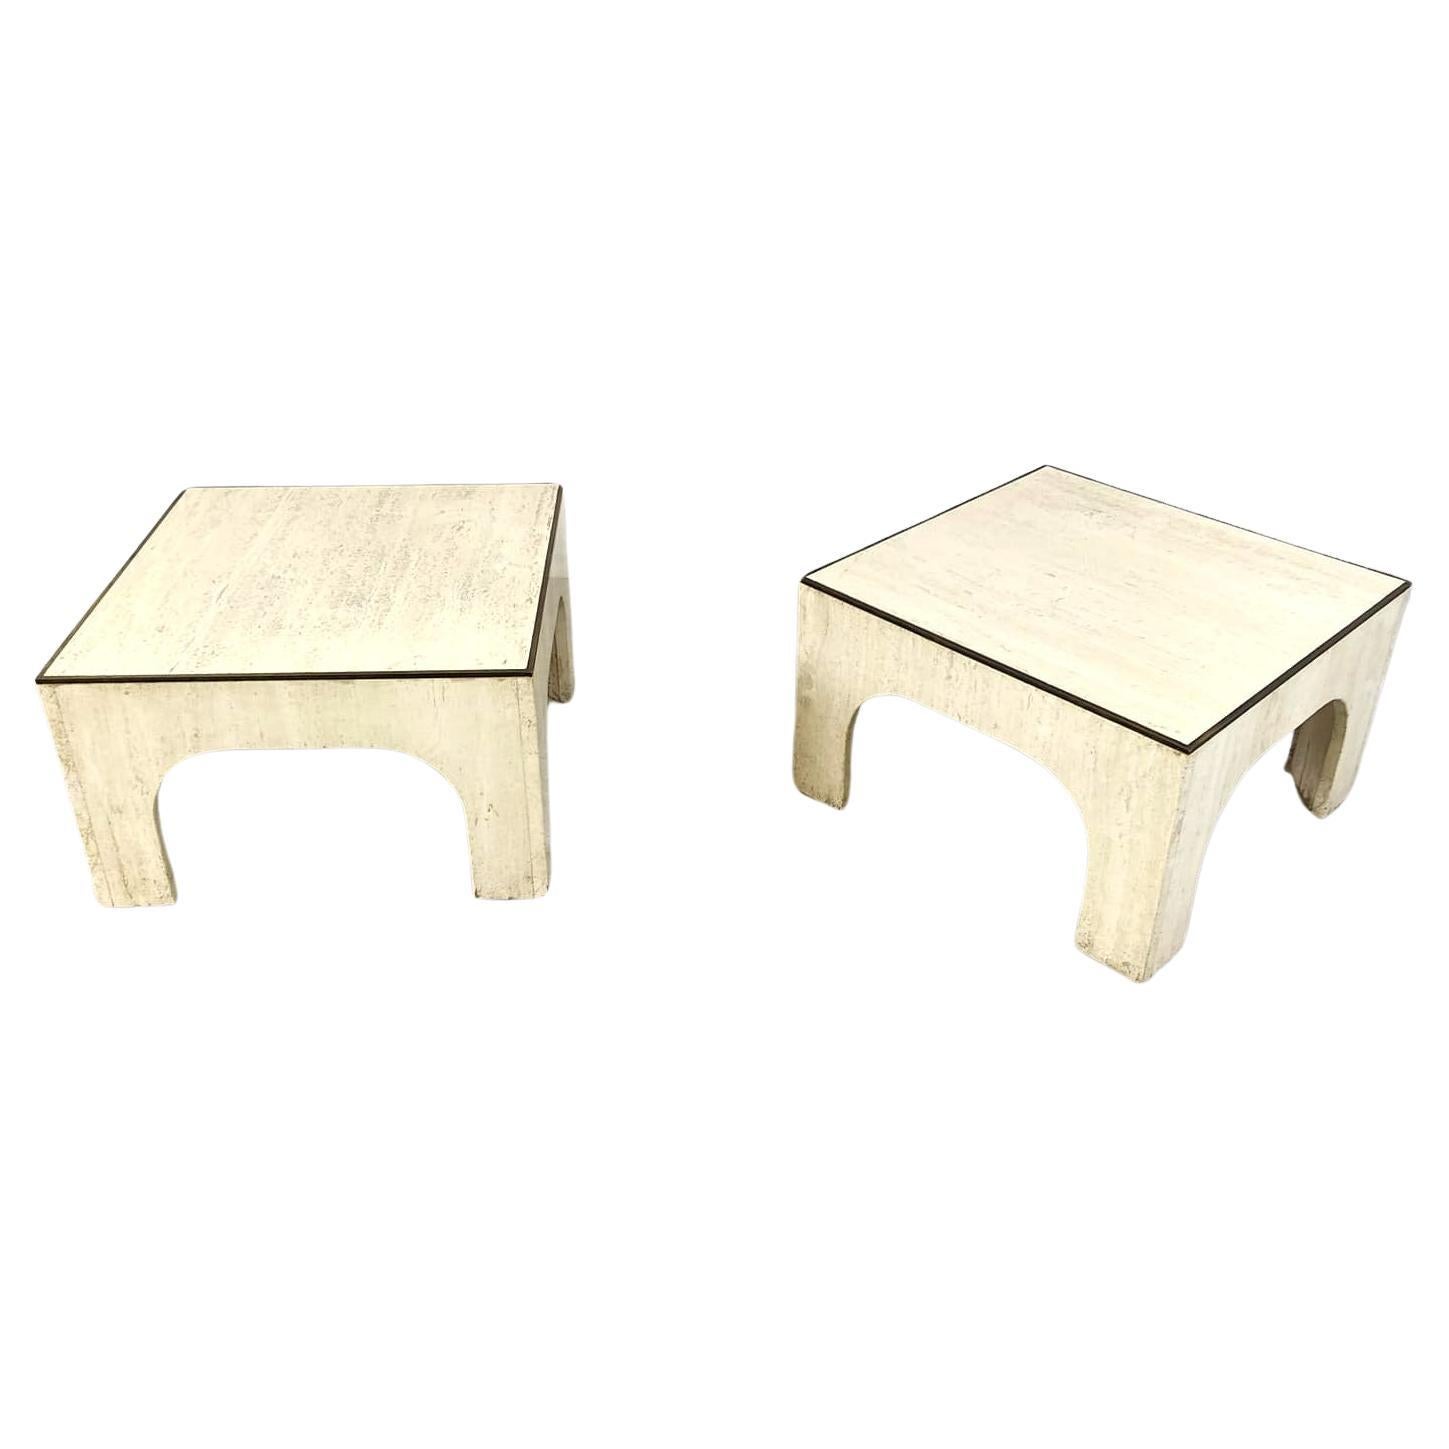 Travertine and brass coffee tables attributed to Willy Rizzo, 1970s For Sale